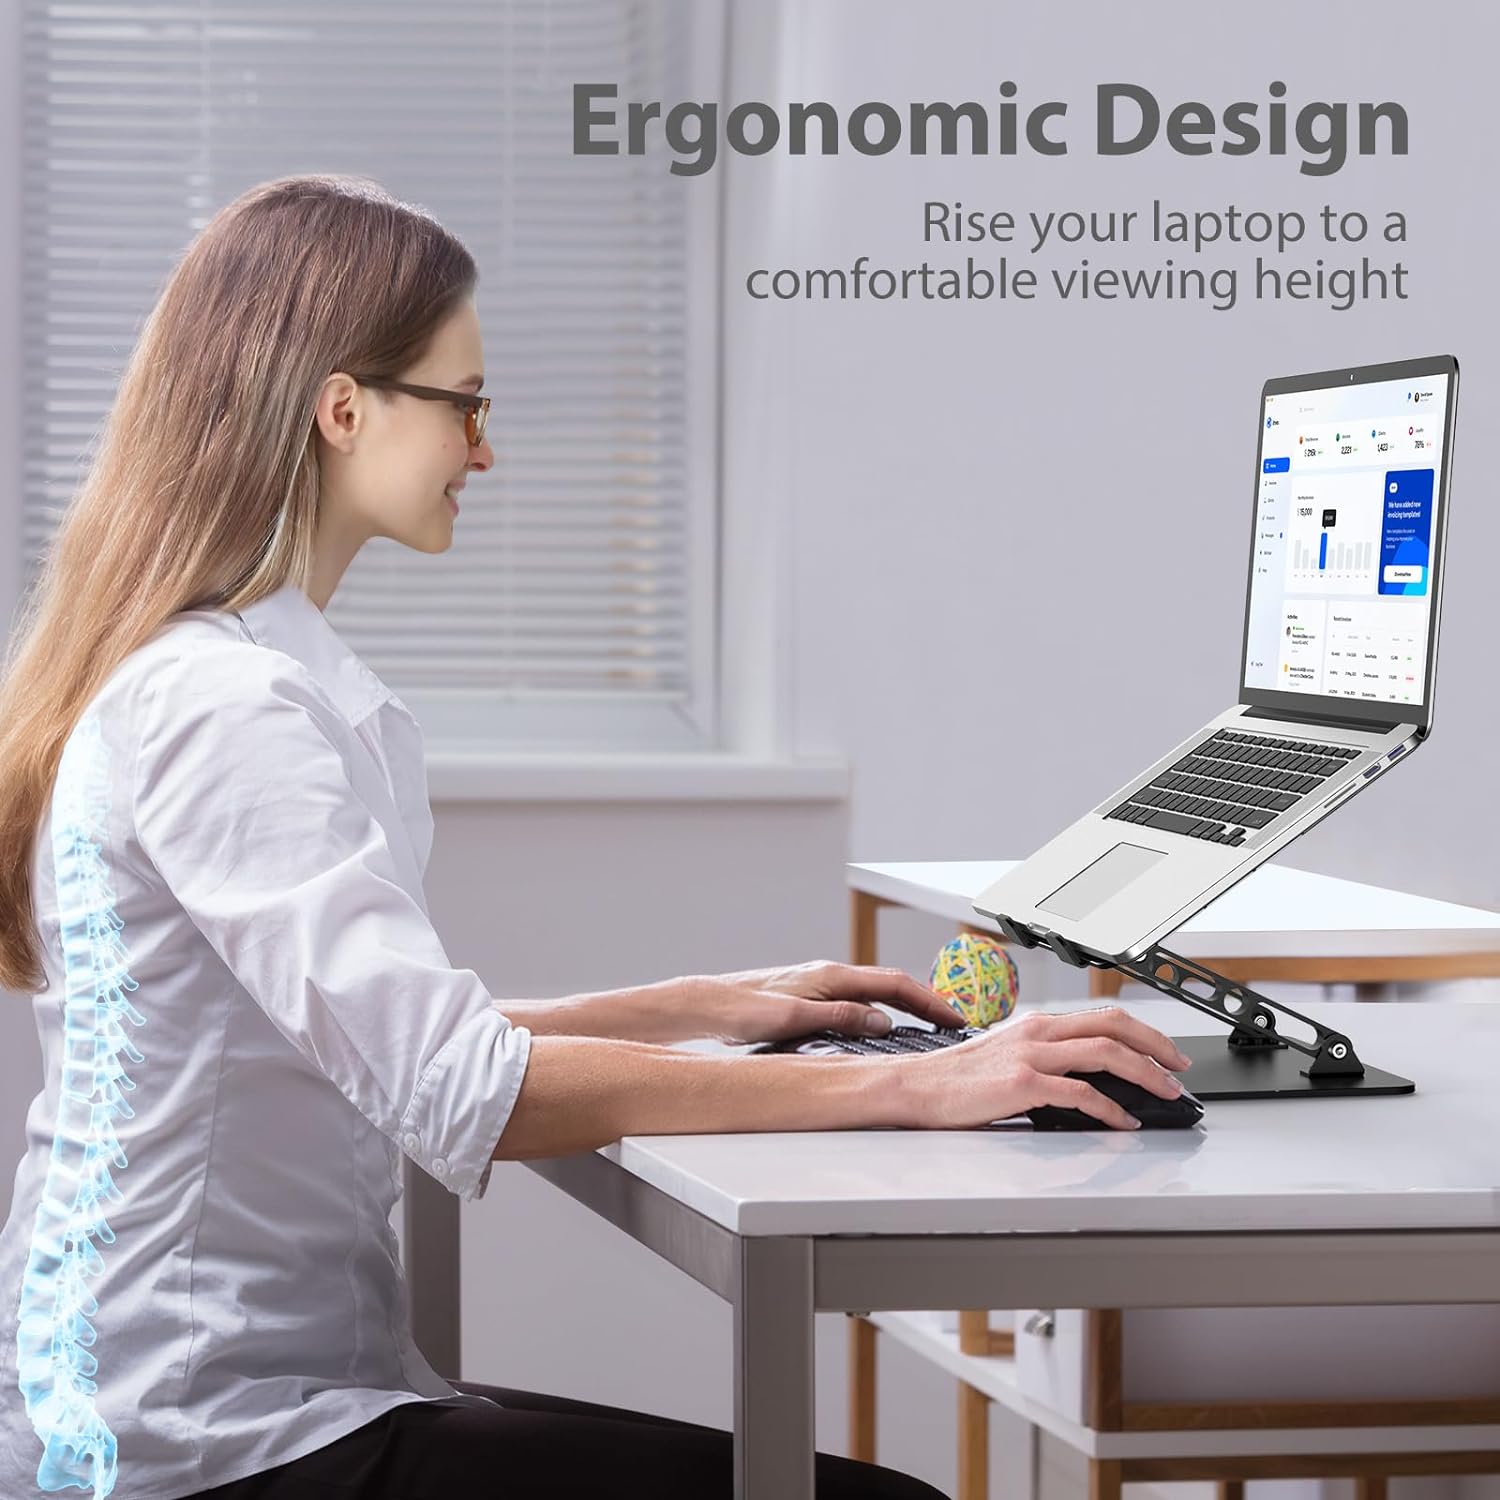 Ergonomic Adjustable Laptop Stand - Durable Metal Laptop Holder - With Ventilated Cooling - Macbook, Chromebook, Asus, Lenovo, Dell